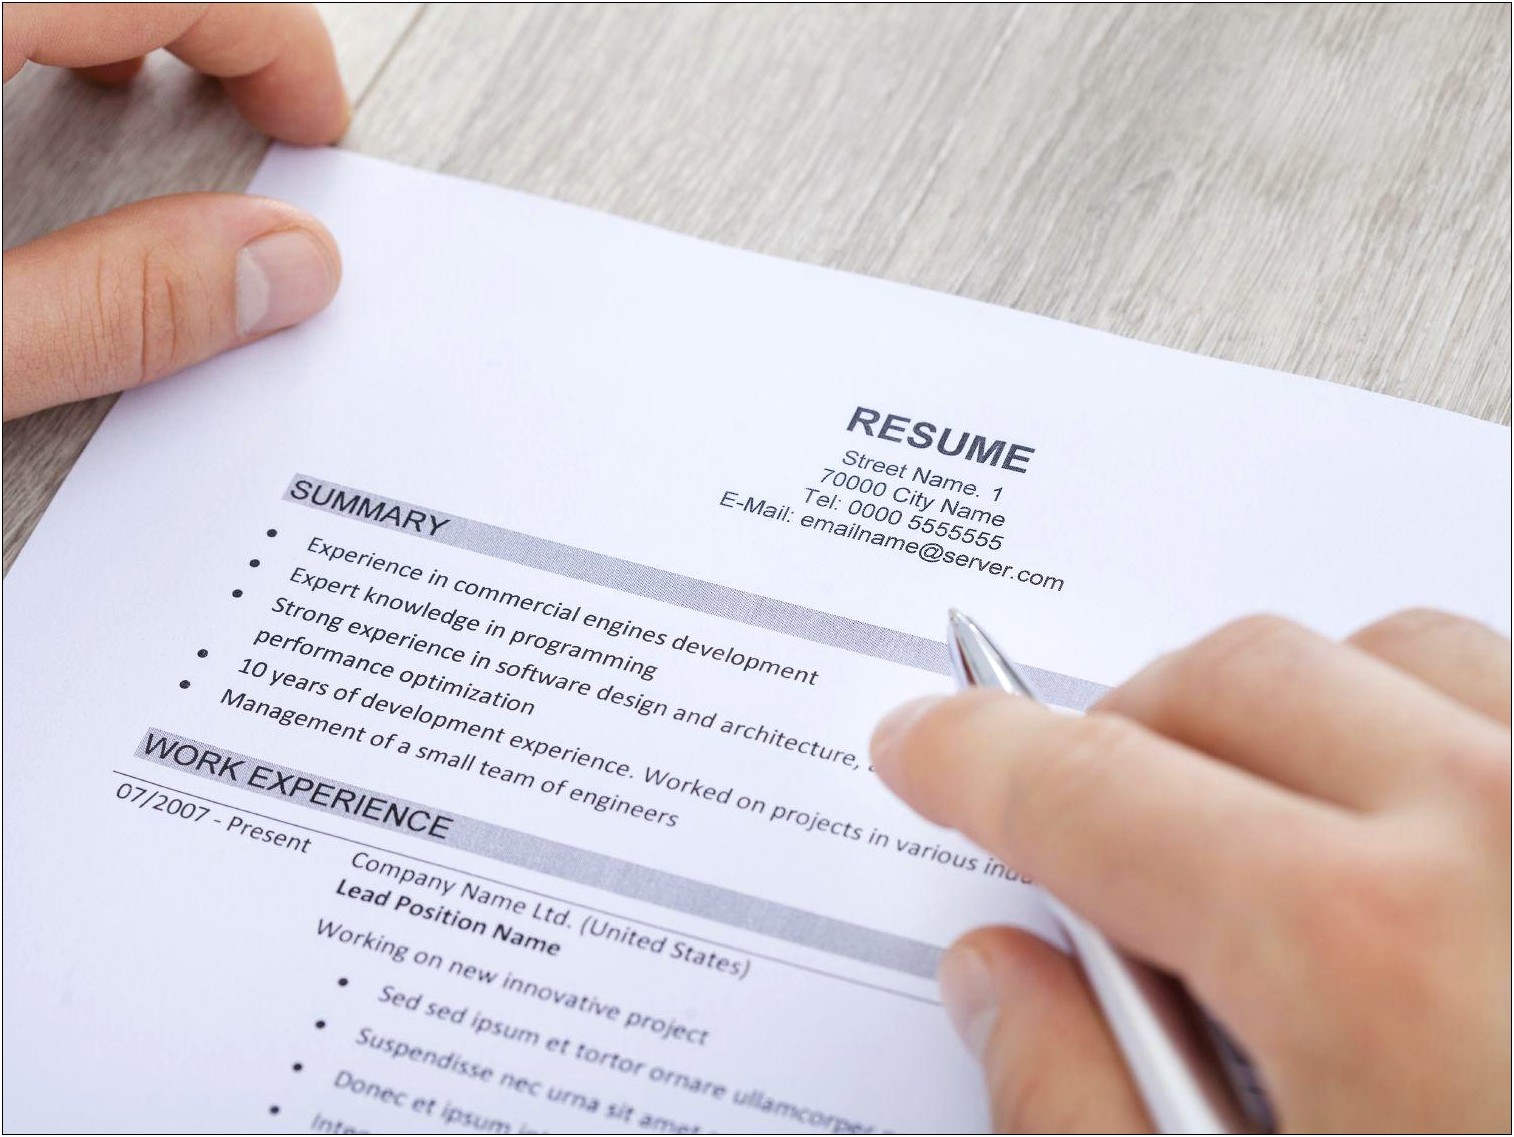 General Summary Of Qualifications For Resume